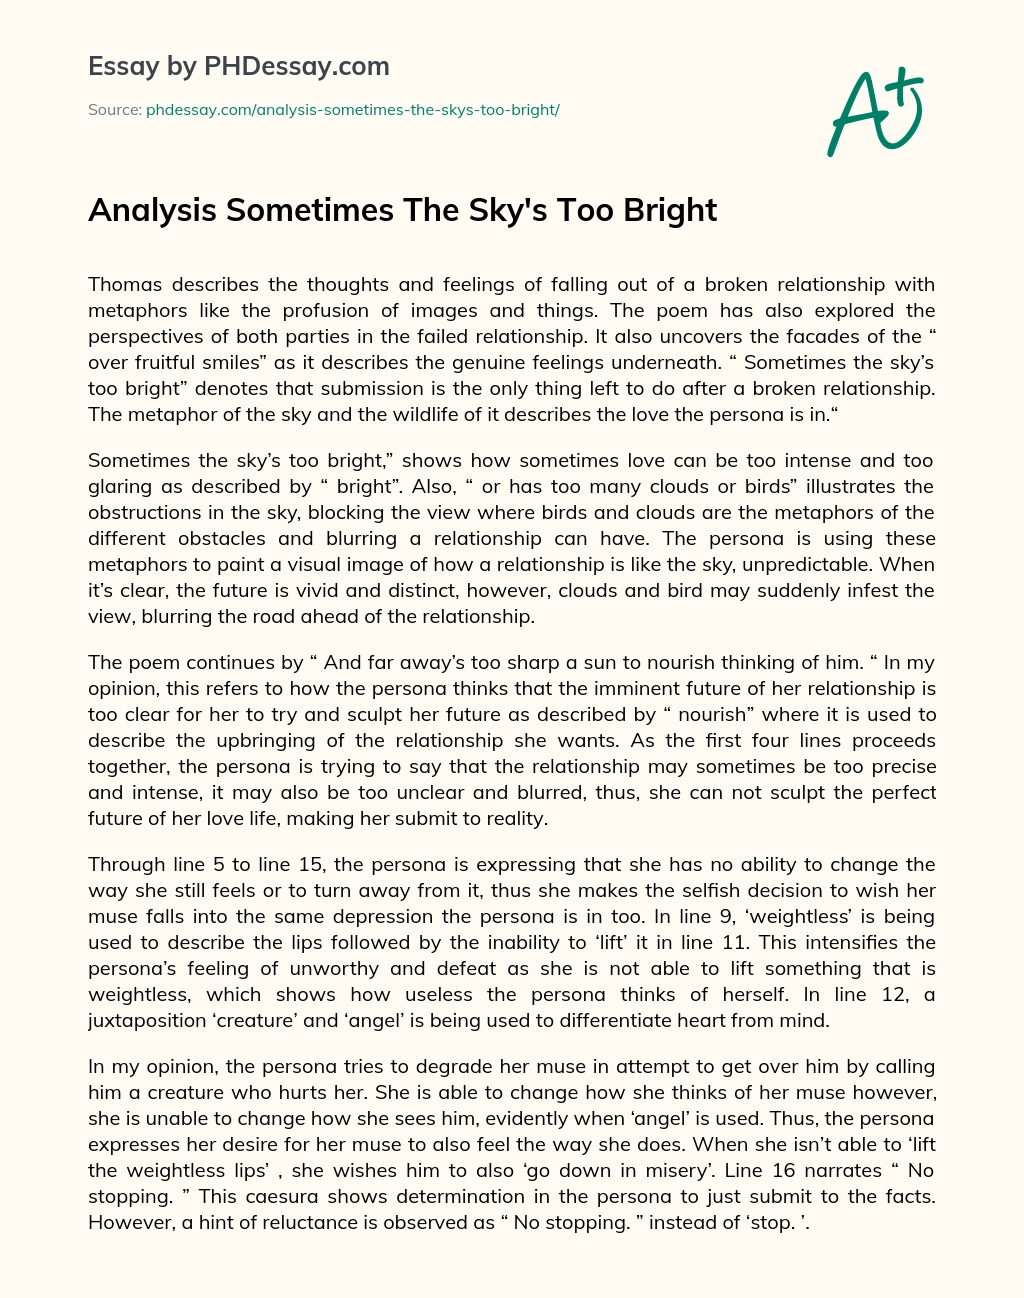 Analysis Sometimes The Sky’s Too Bright essay